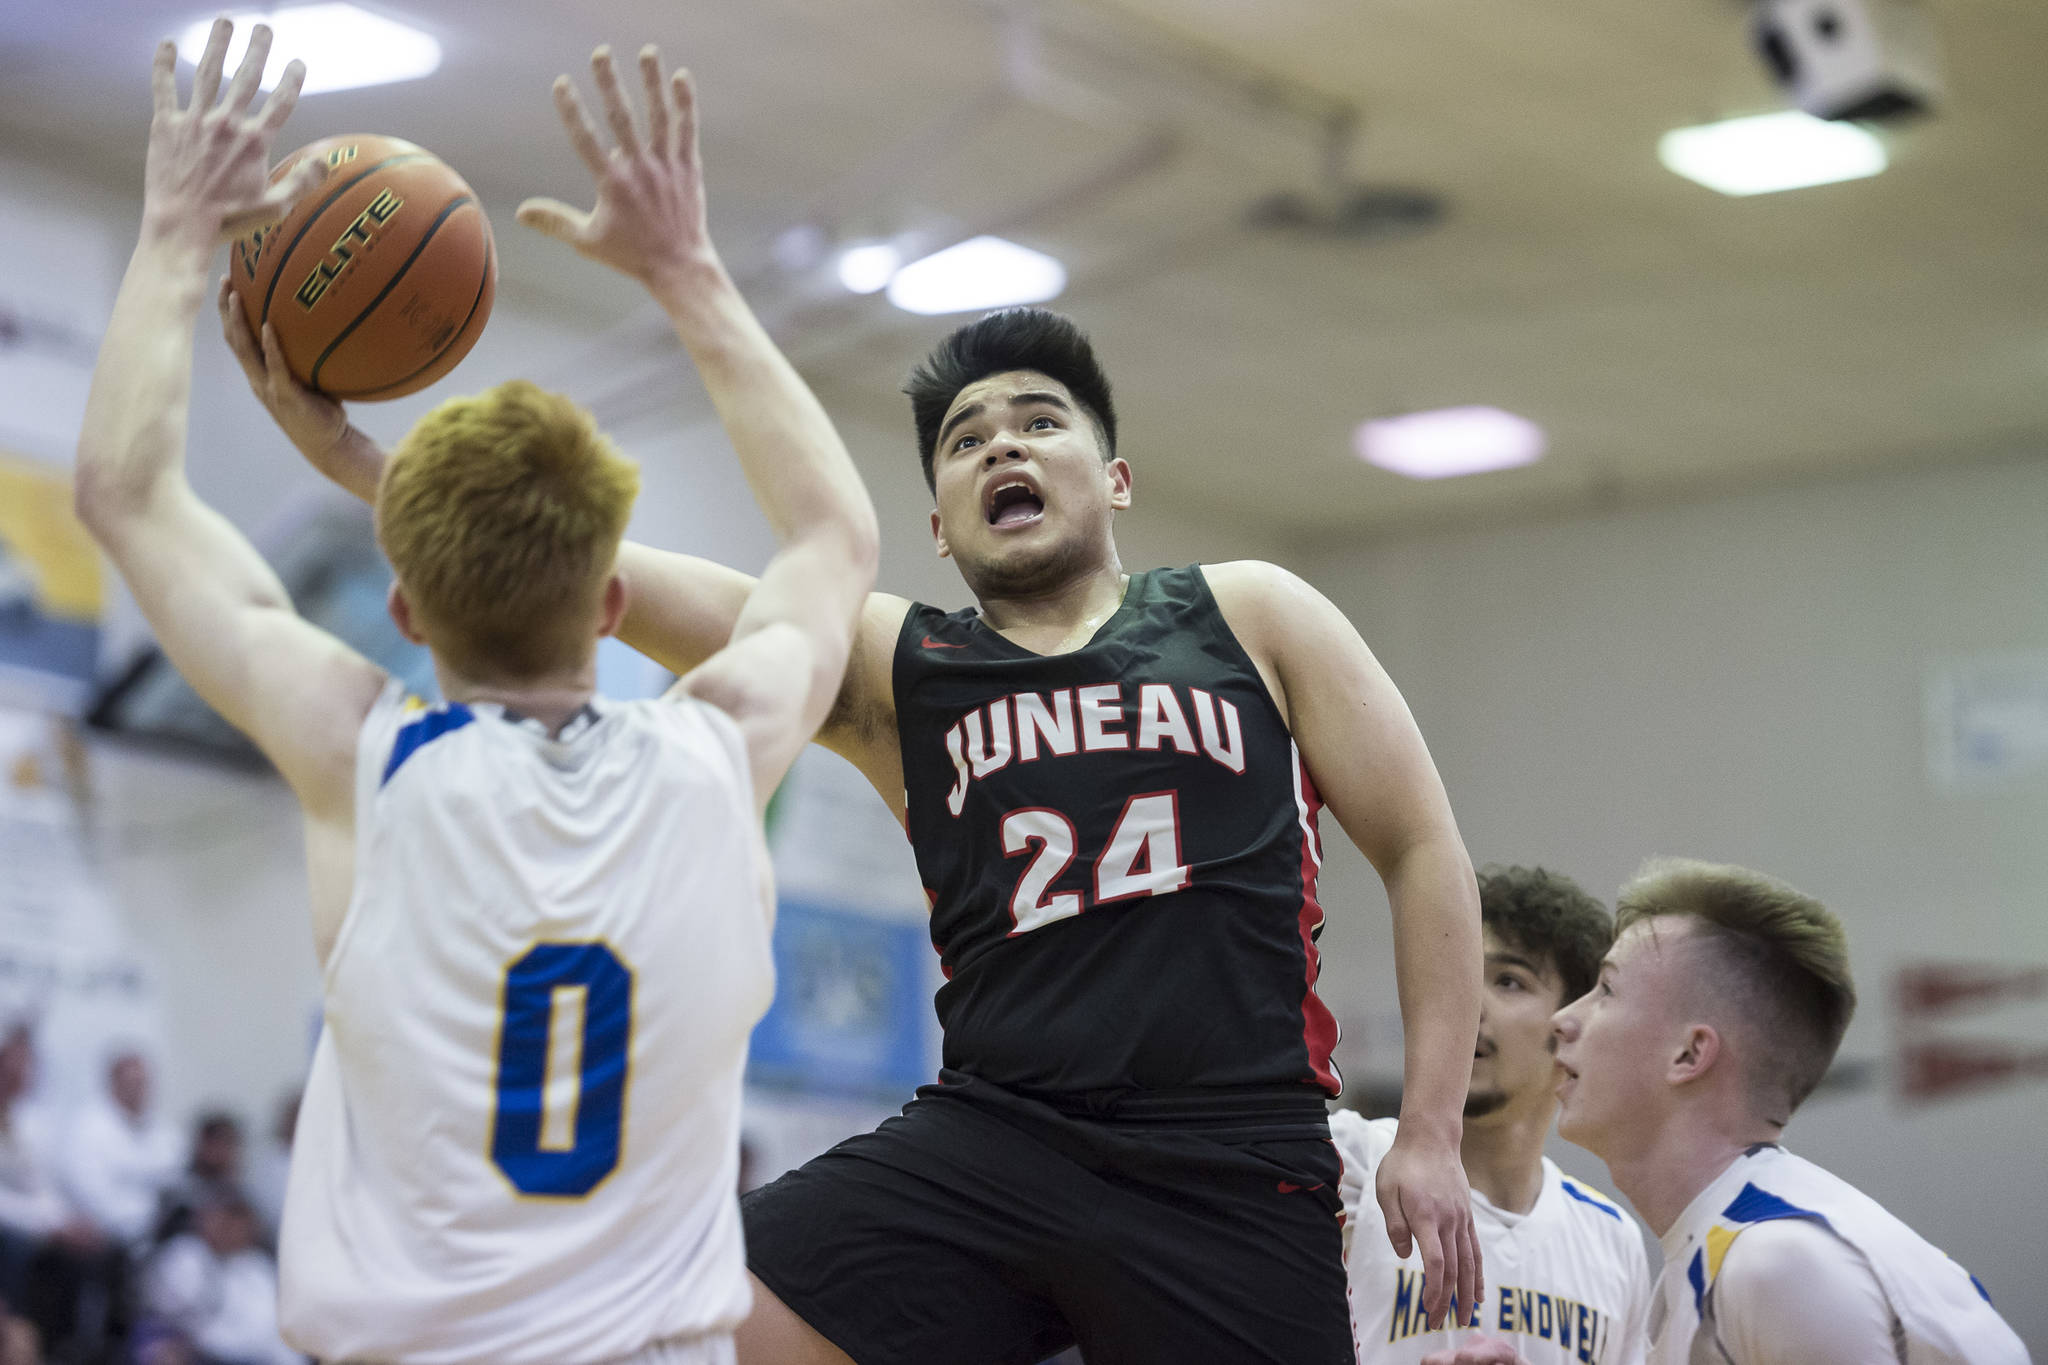 Juneau-Douglas’ Philip Gonzales, center, lays the ball up in front of Maine-Endwell’s Gannon Russell, left, at the Princess Cruises Capital City Classic at Juneau-Douglas High School on Saturday, Dec. 29, 2018. Juneau-Douglas won 66-61. (Michael Penn | Juneau Empire)